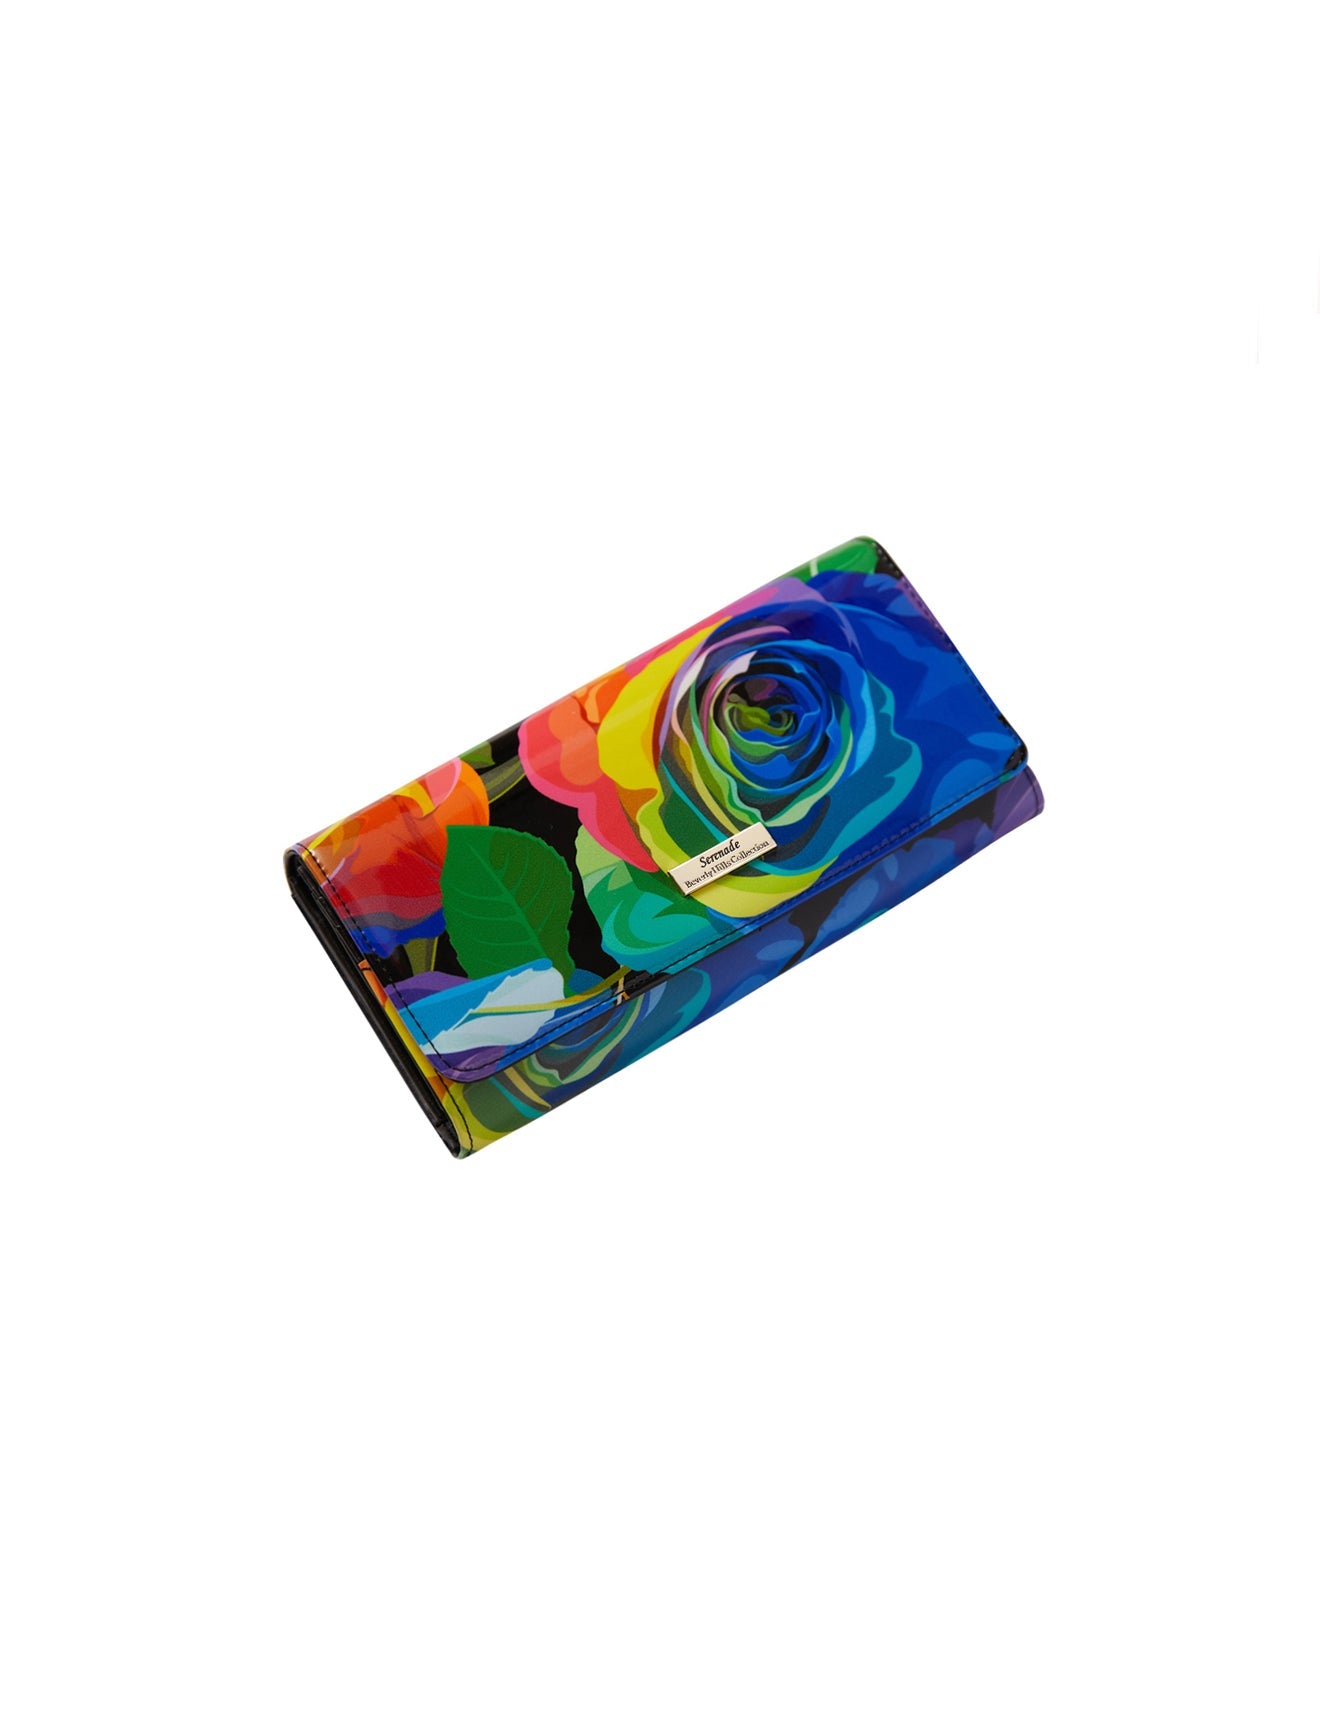 Serenade - Rainbow Rose WSN-3601 Leather Wallet - Large-3